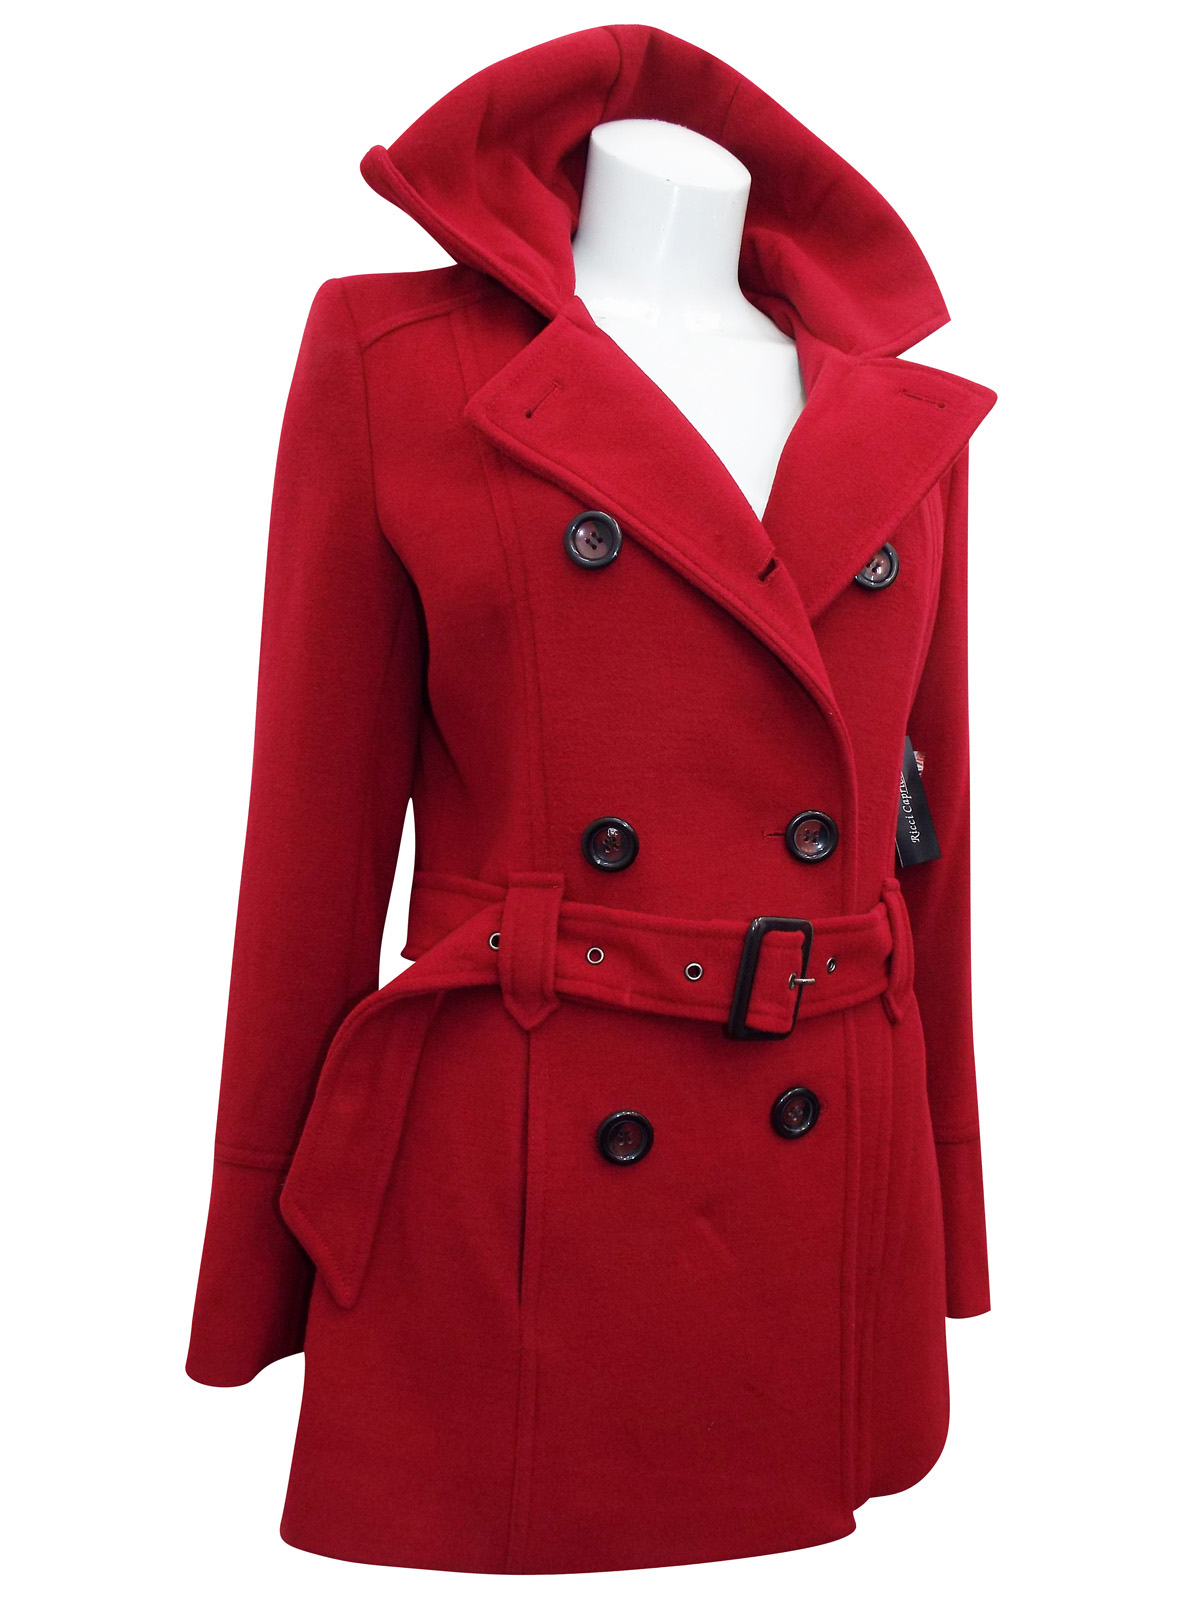 Ricci Capricci - - Ricci Capricci RED Double Breasted Hooded Coat with ...